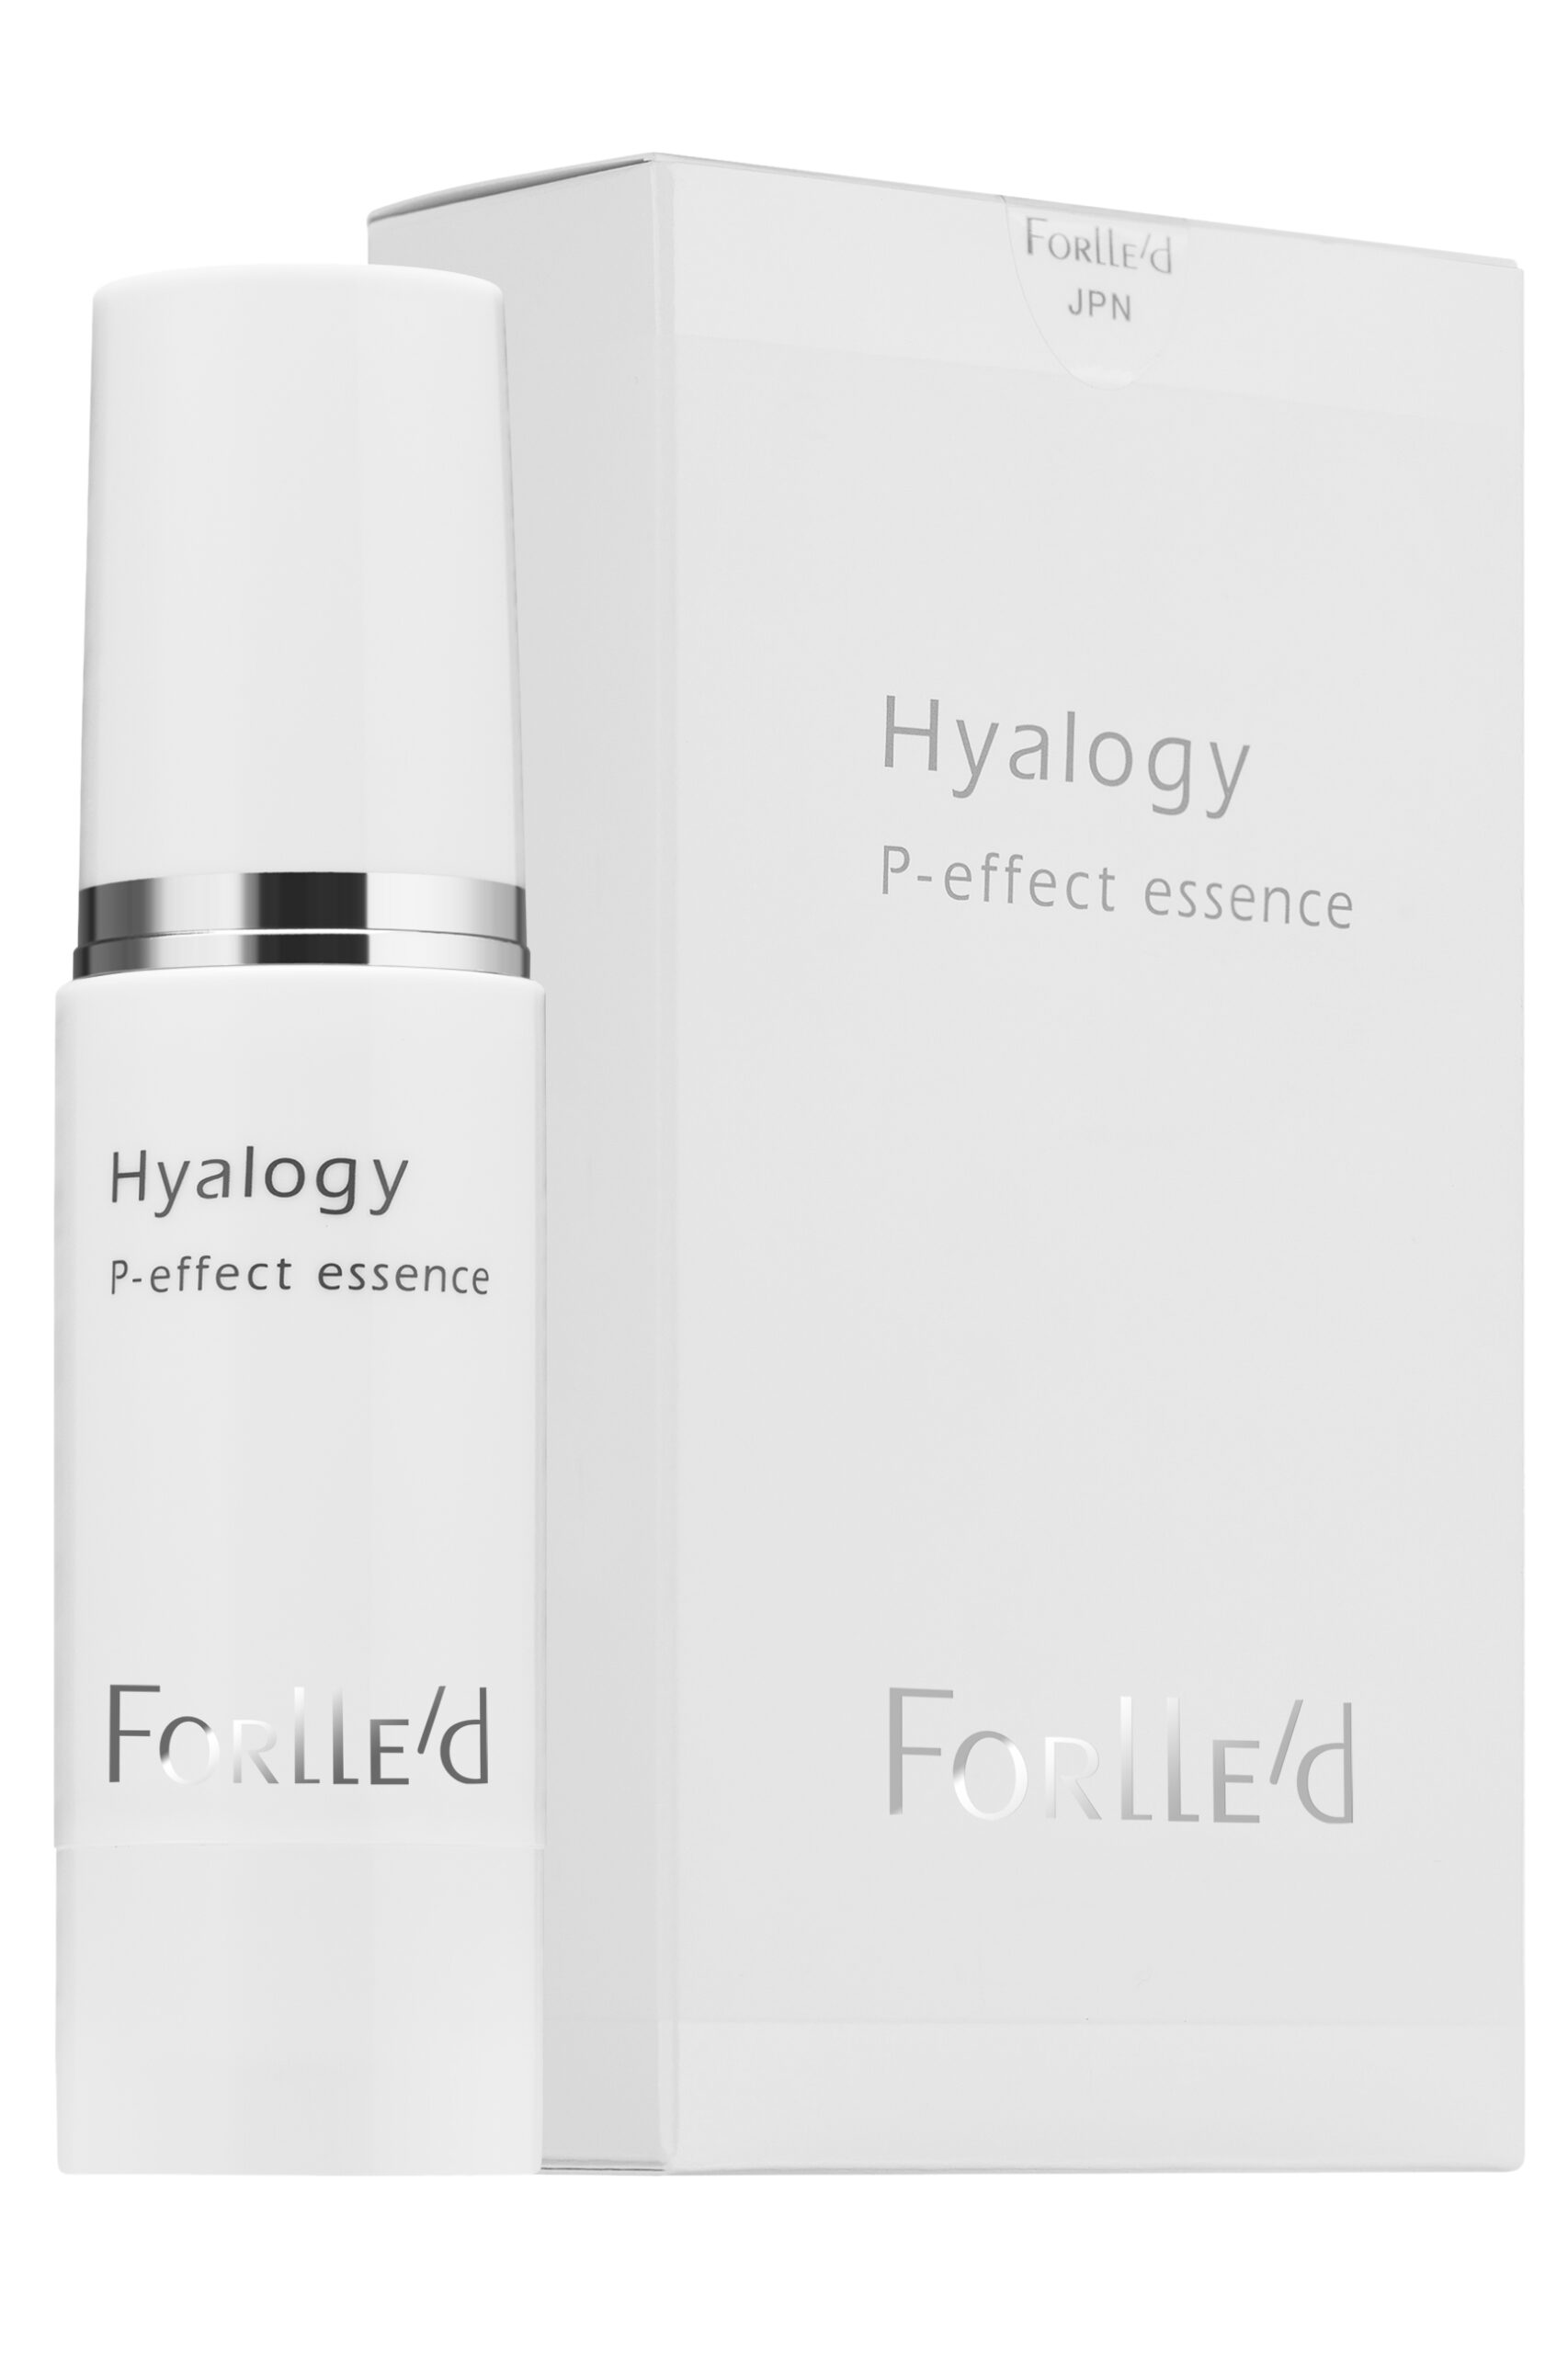 Hyalogy P-effect essence DOM